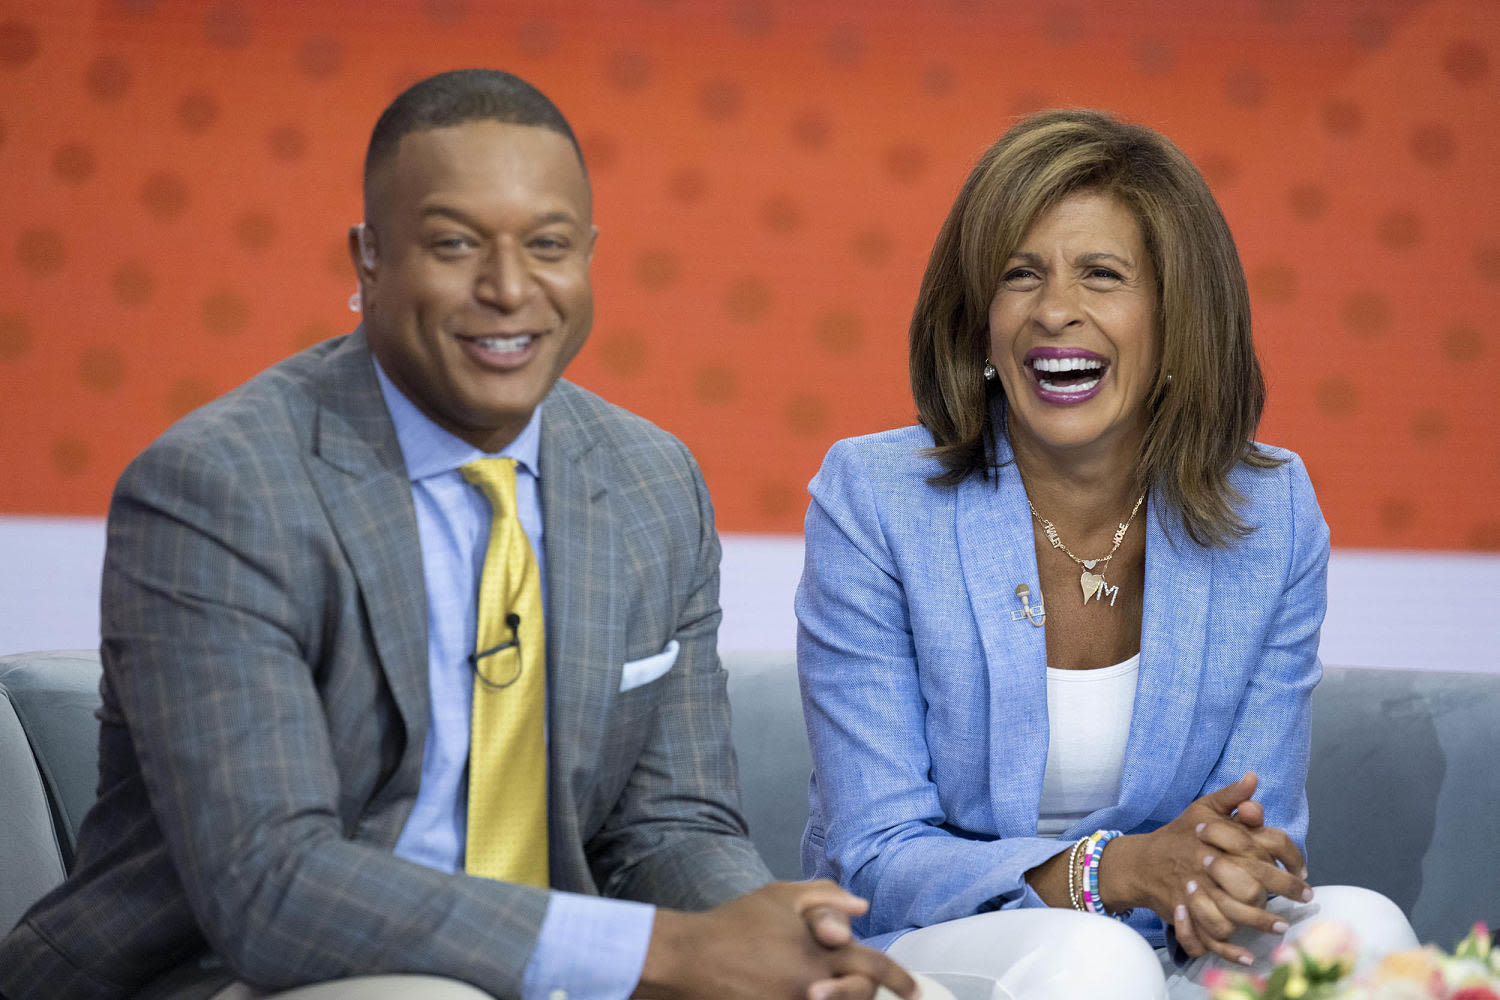 Hoda Kotb can't escape the Olympics opening ceremony in hilarious gym video